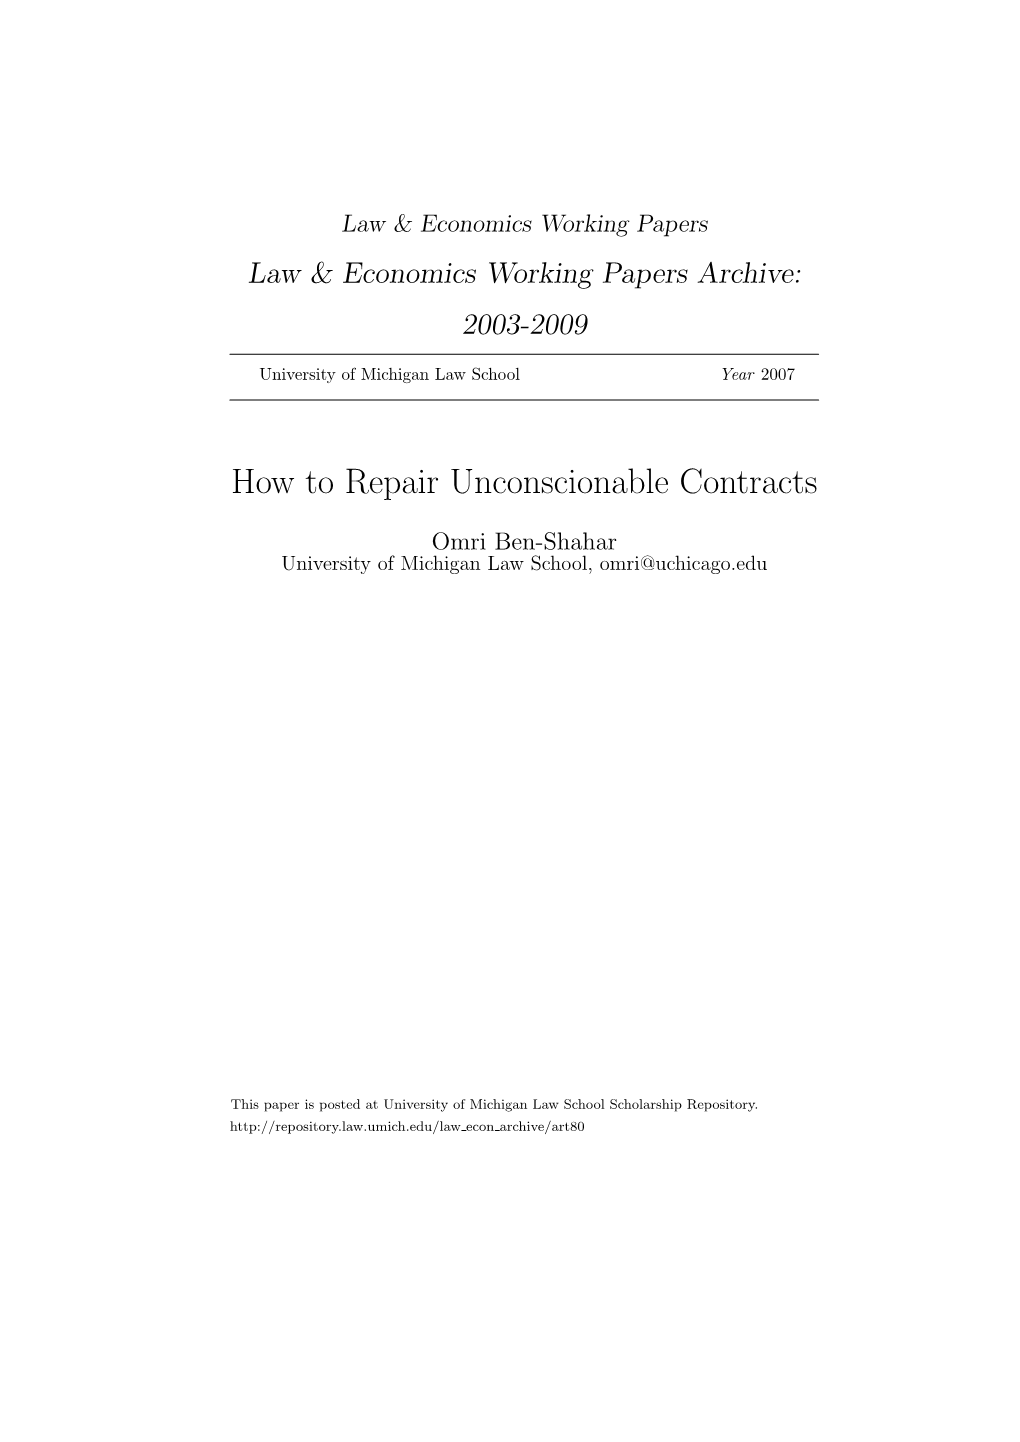 How to Repair Unconscionable Contracts